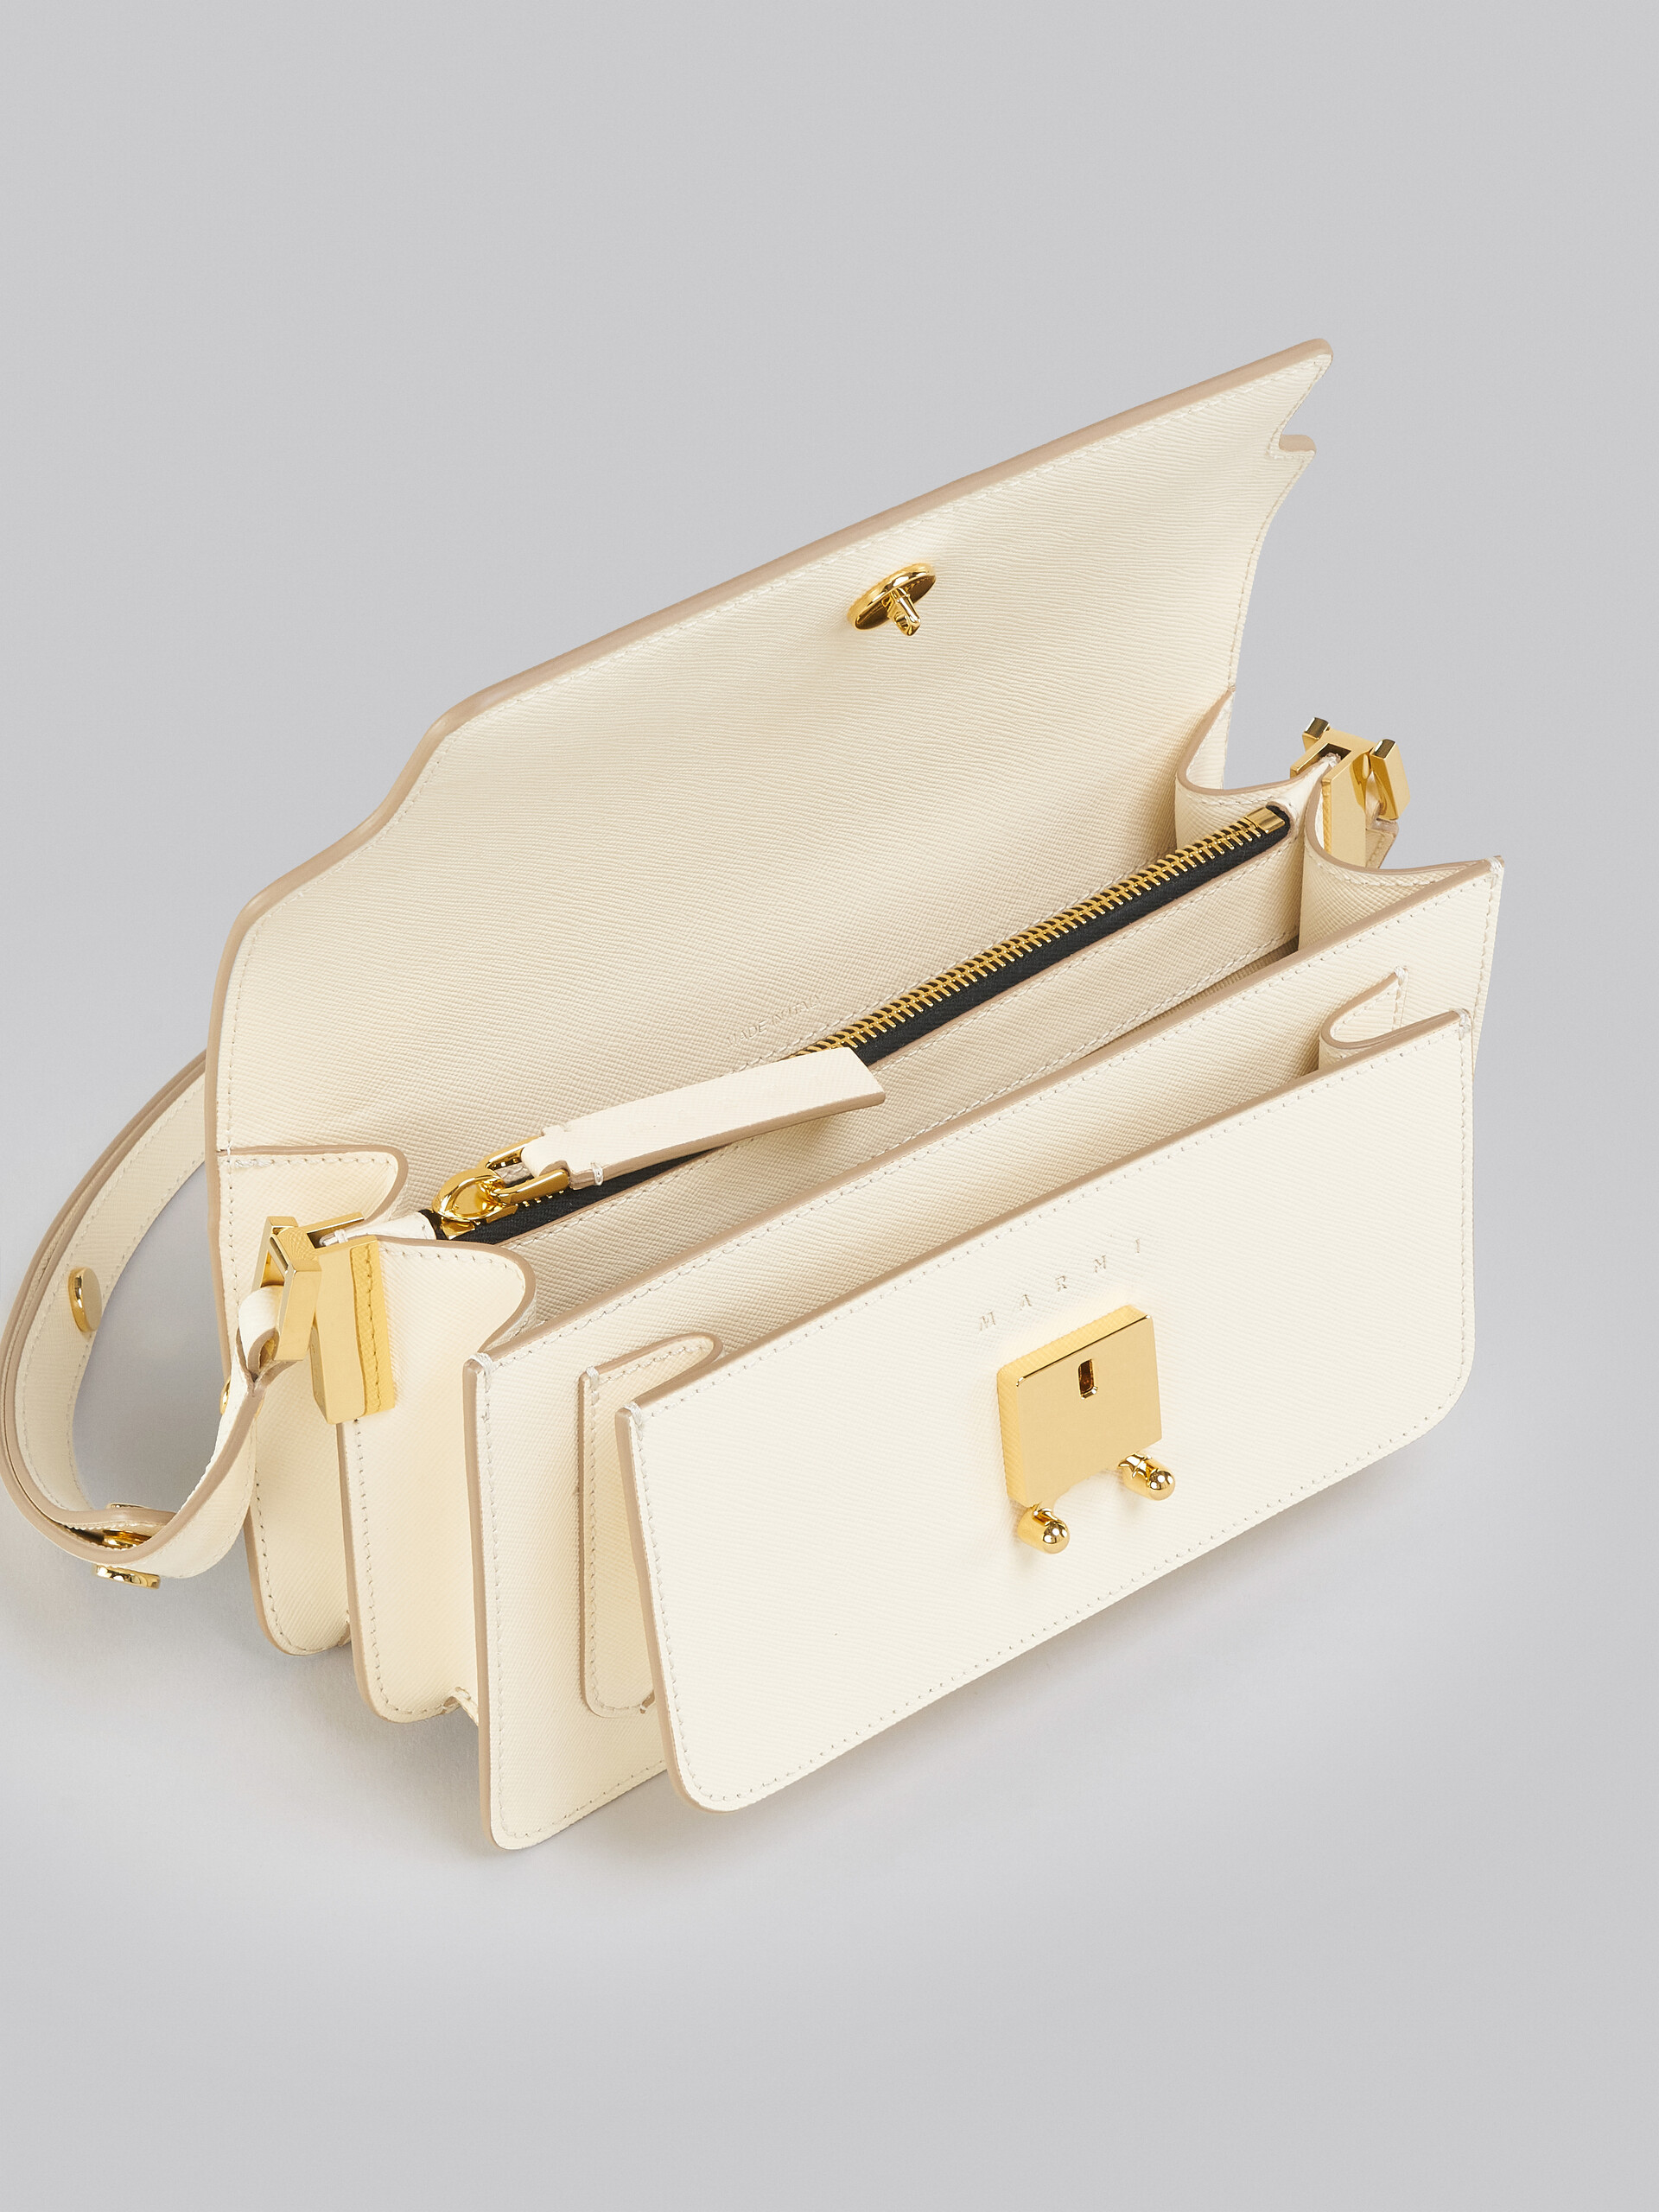 Trunk Bag E/W in white saffiano leather - Shoulder Bags - Image 4